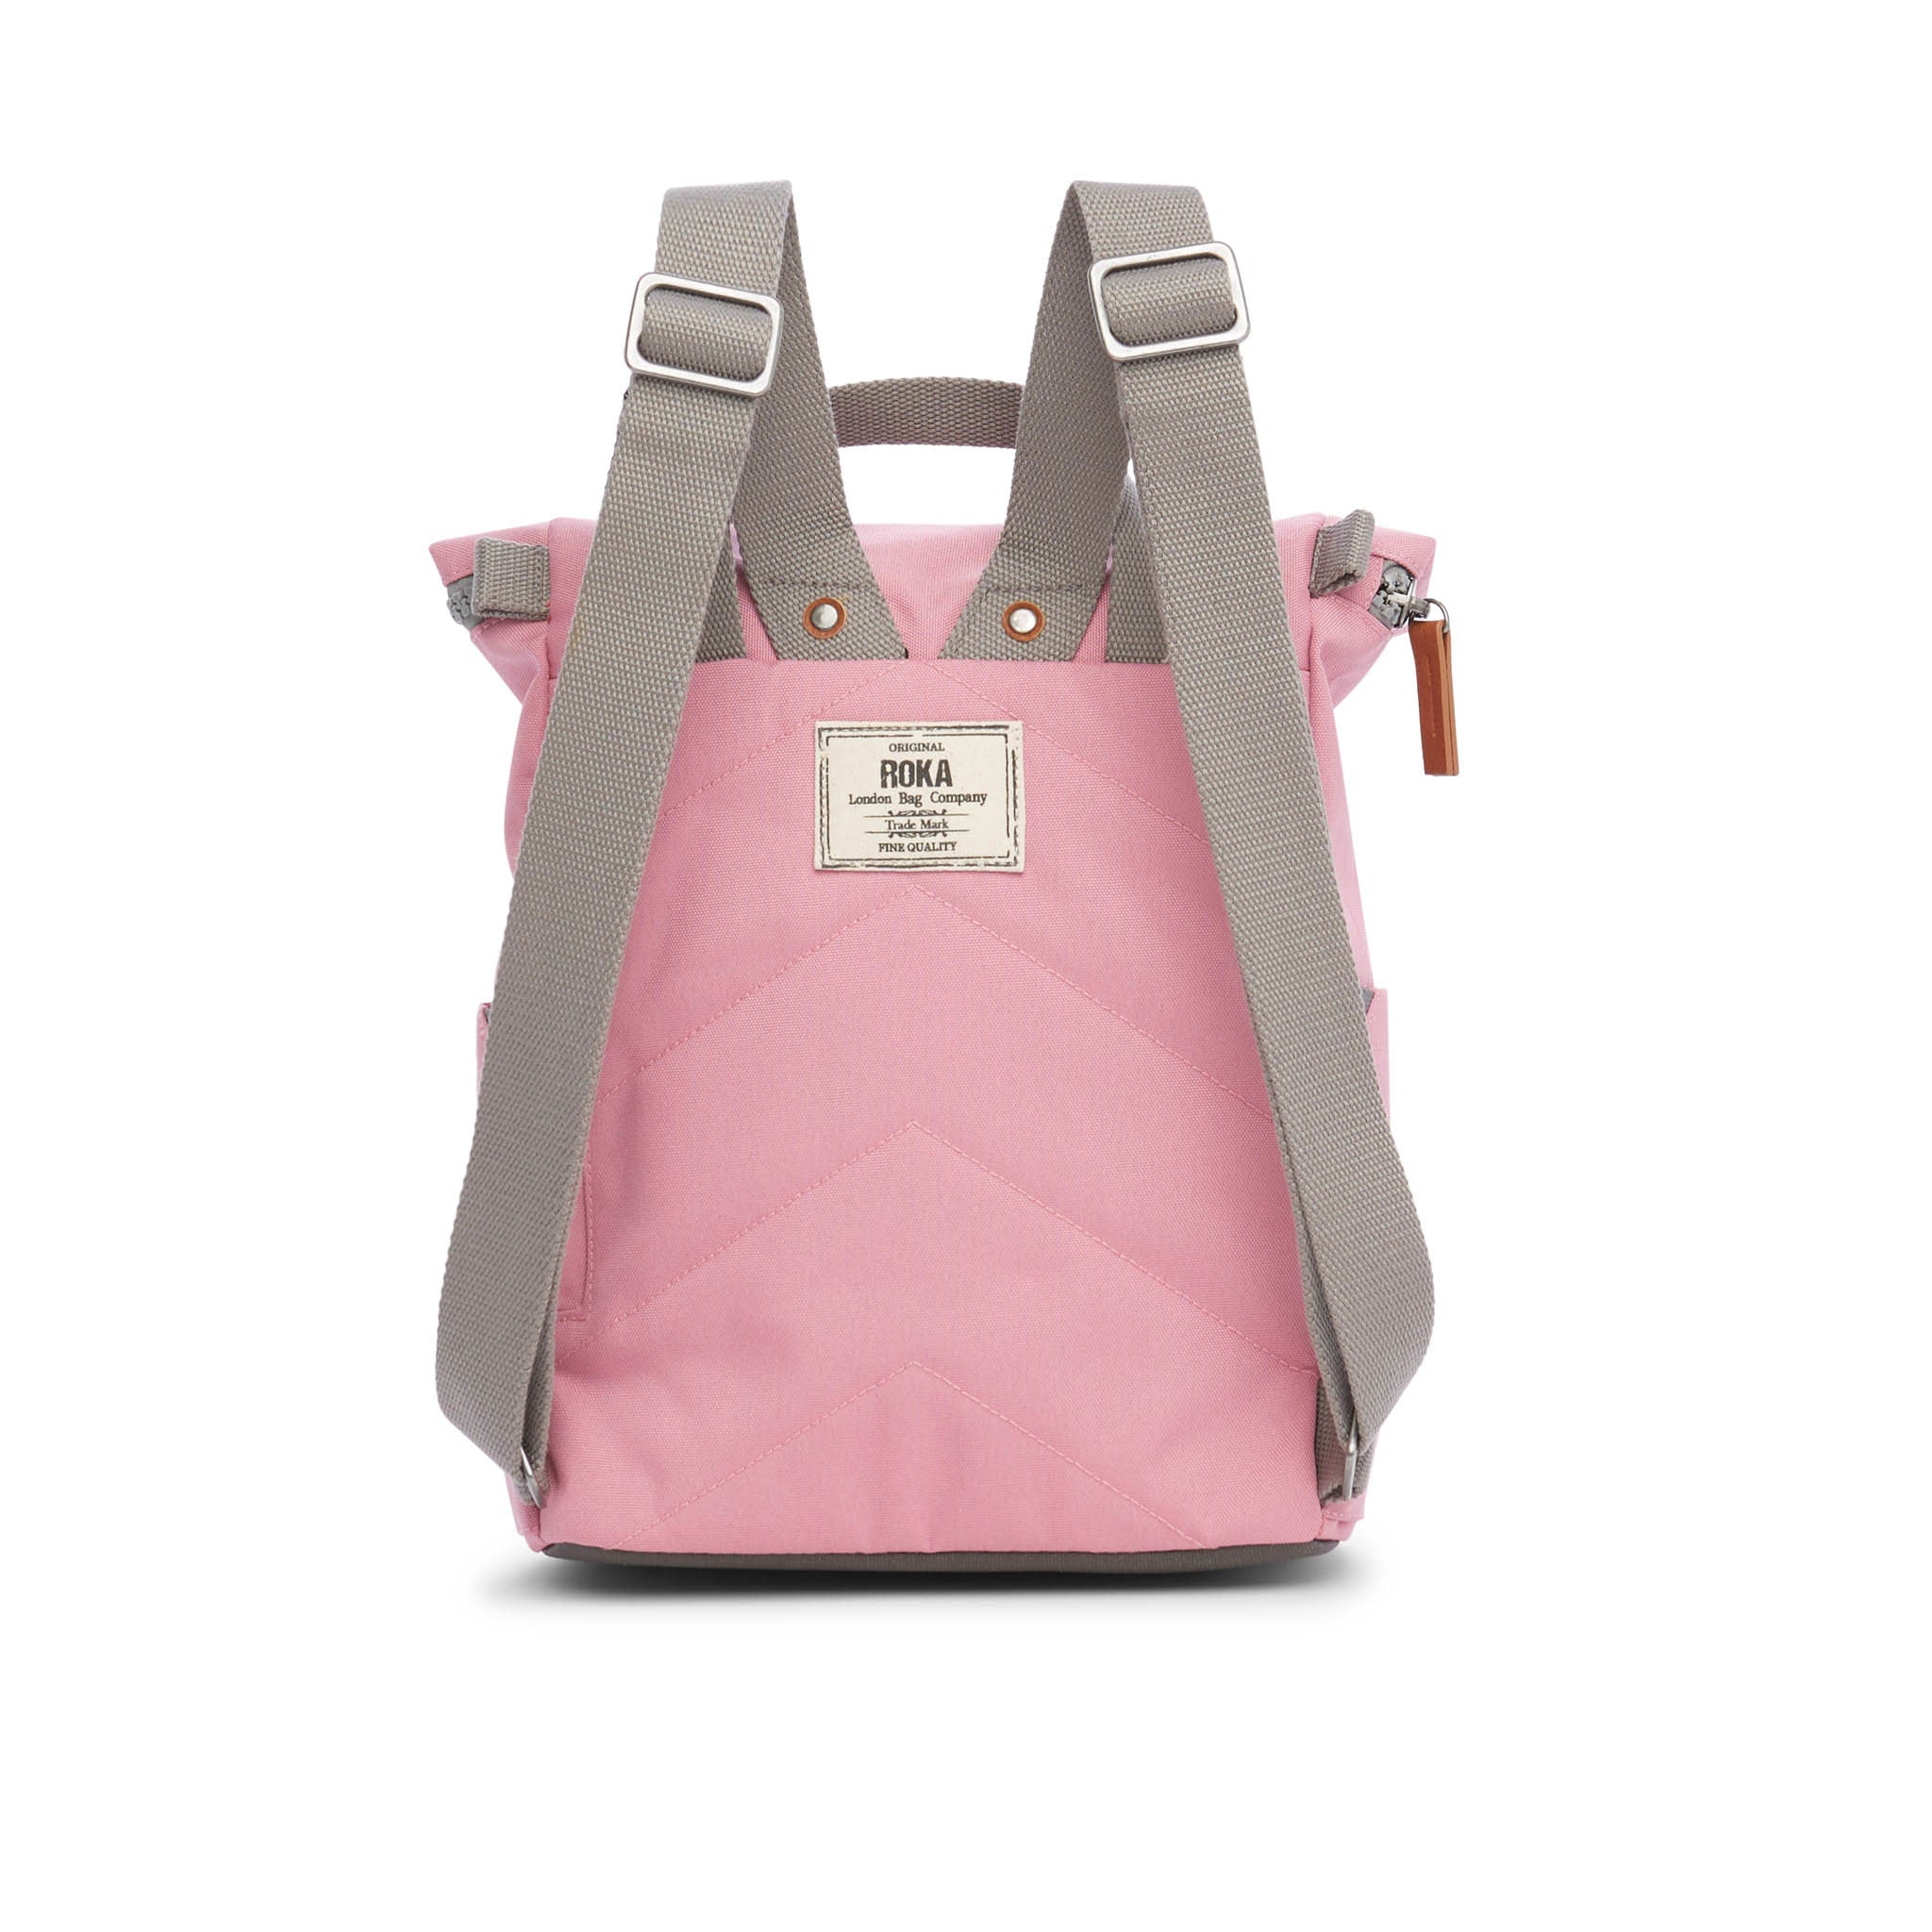 ROKA London Finchely A Antique Pink (Small)